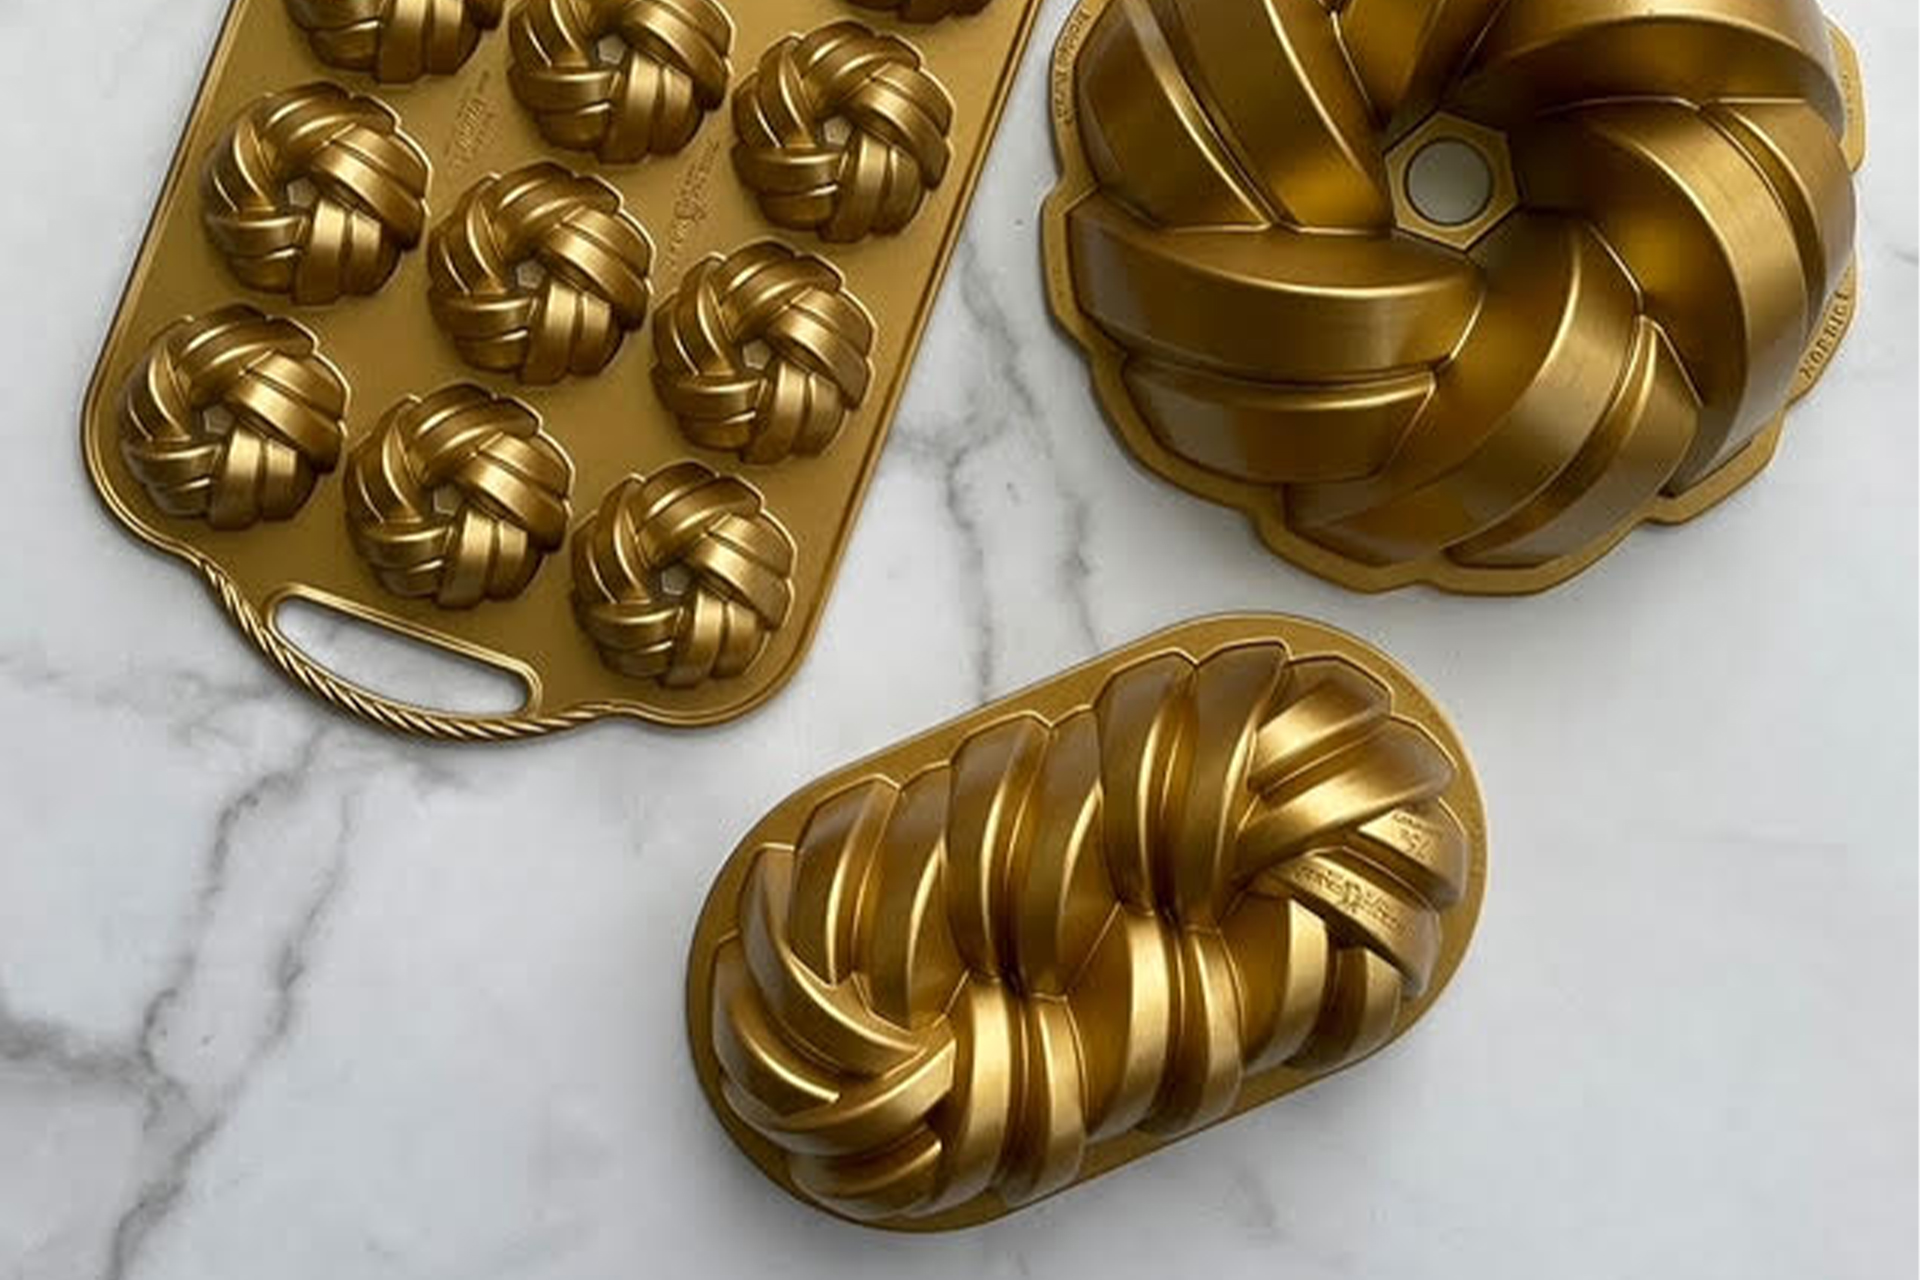 Nordic Ware Adds Braided Loaf Pan to 75th Anniversary Collection